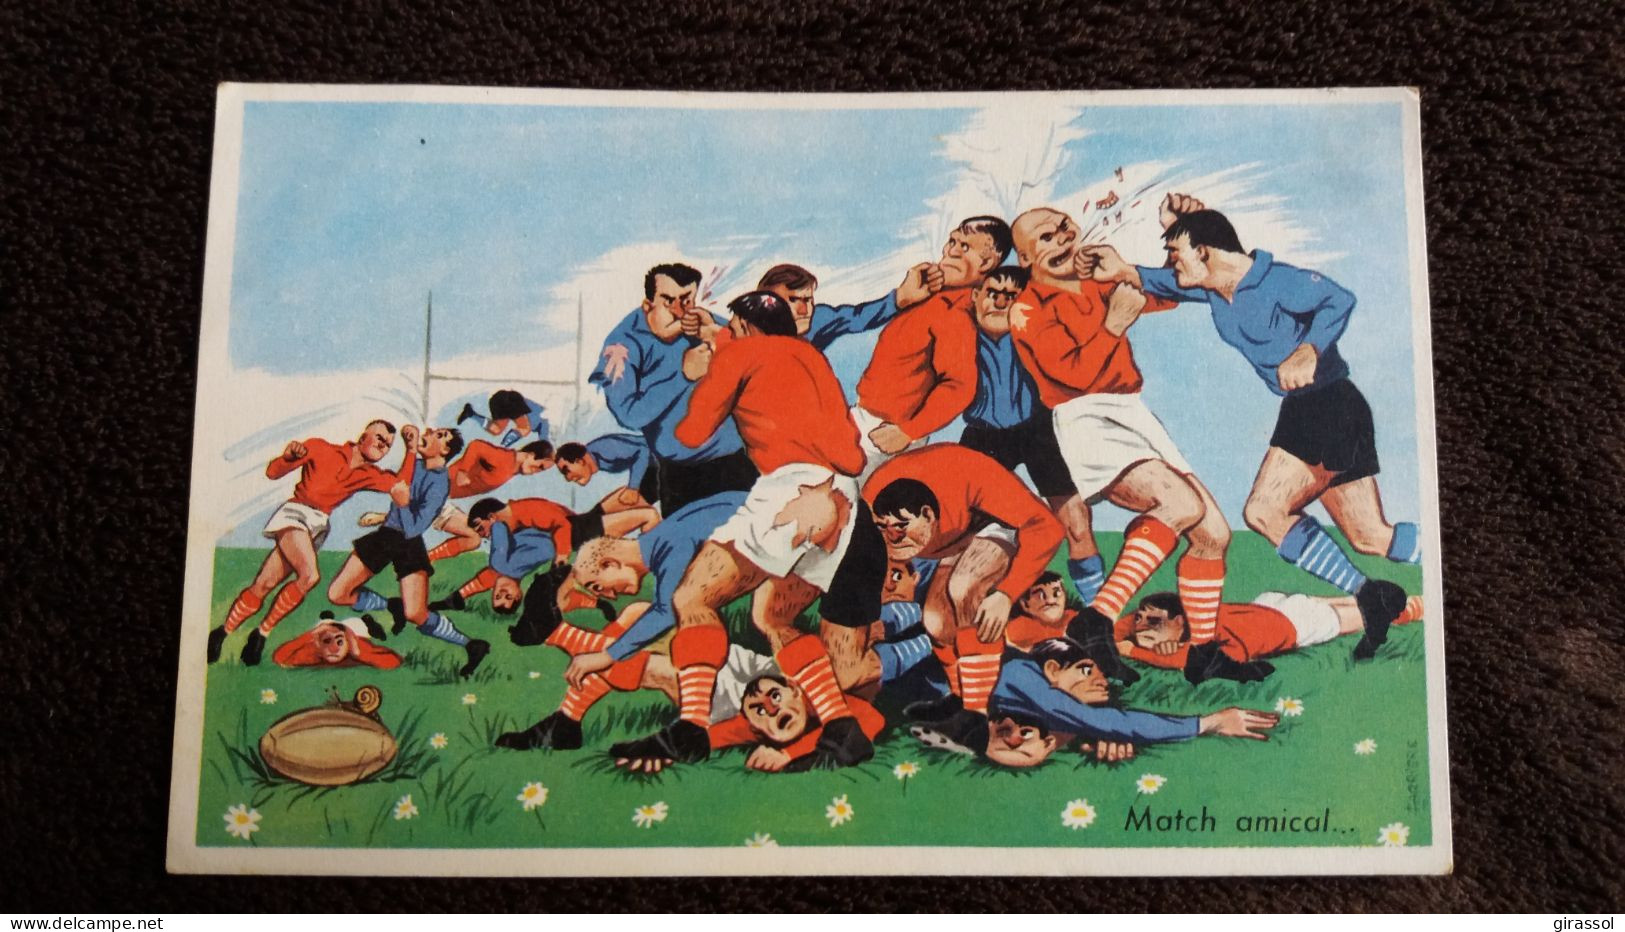 CPSM RUGBY MATCH AMICAL BAGARRE BALLON ILLUSTRATEUR CARRIERE HUMOUR ED PHOTOCHROM 730 - Rugby